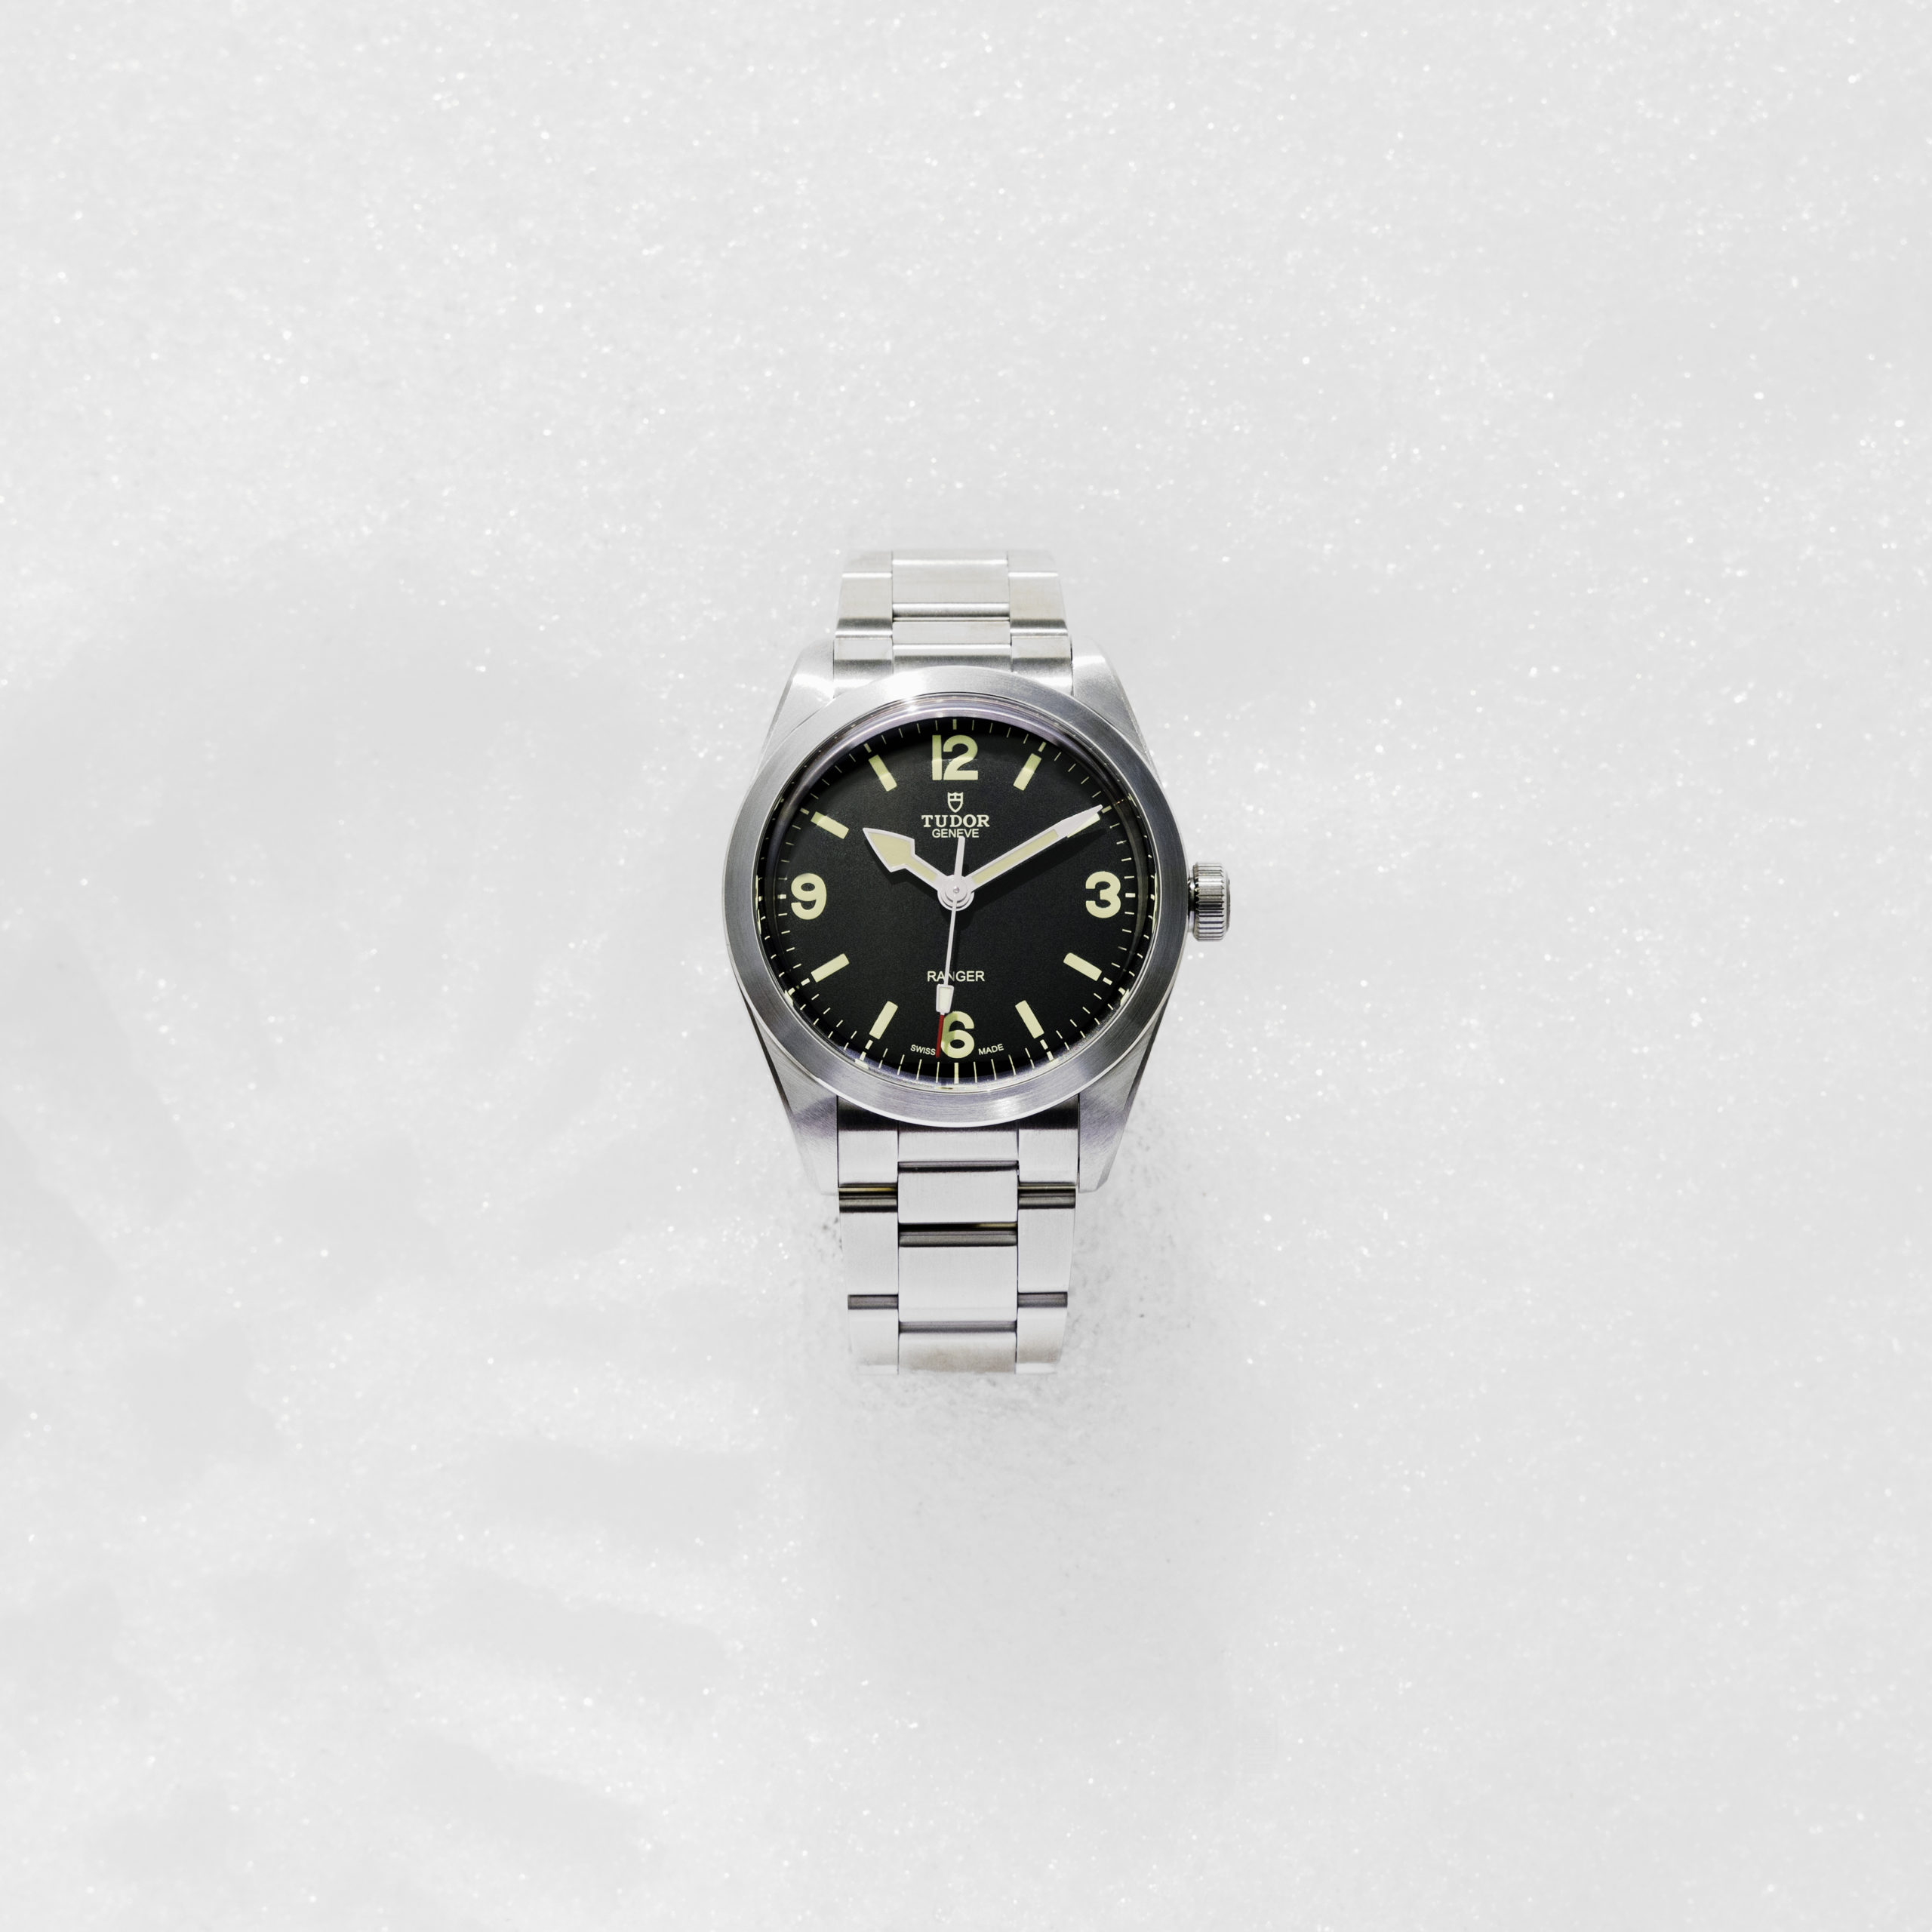 Tudor’s New Ranger Watch, The Ideal Watch For The Spirited